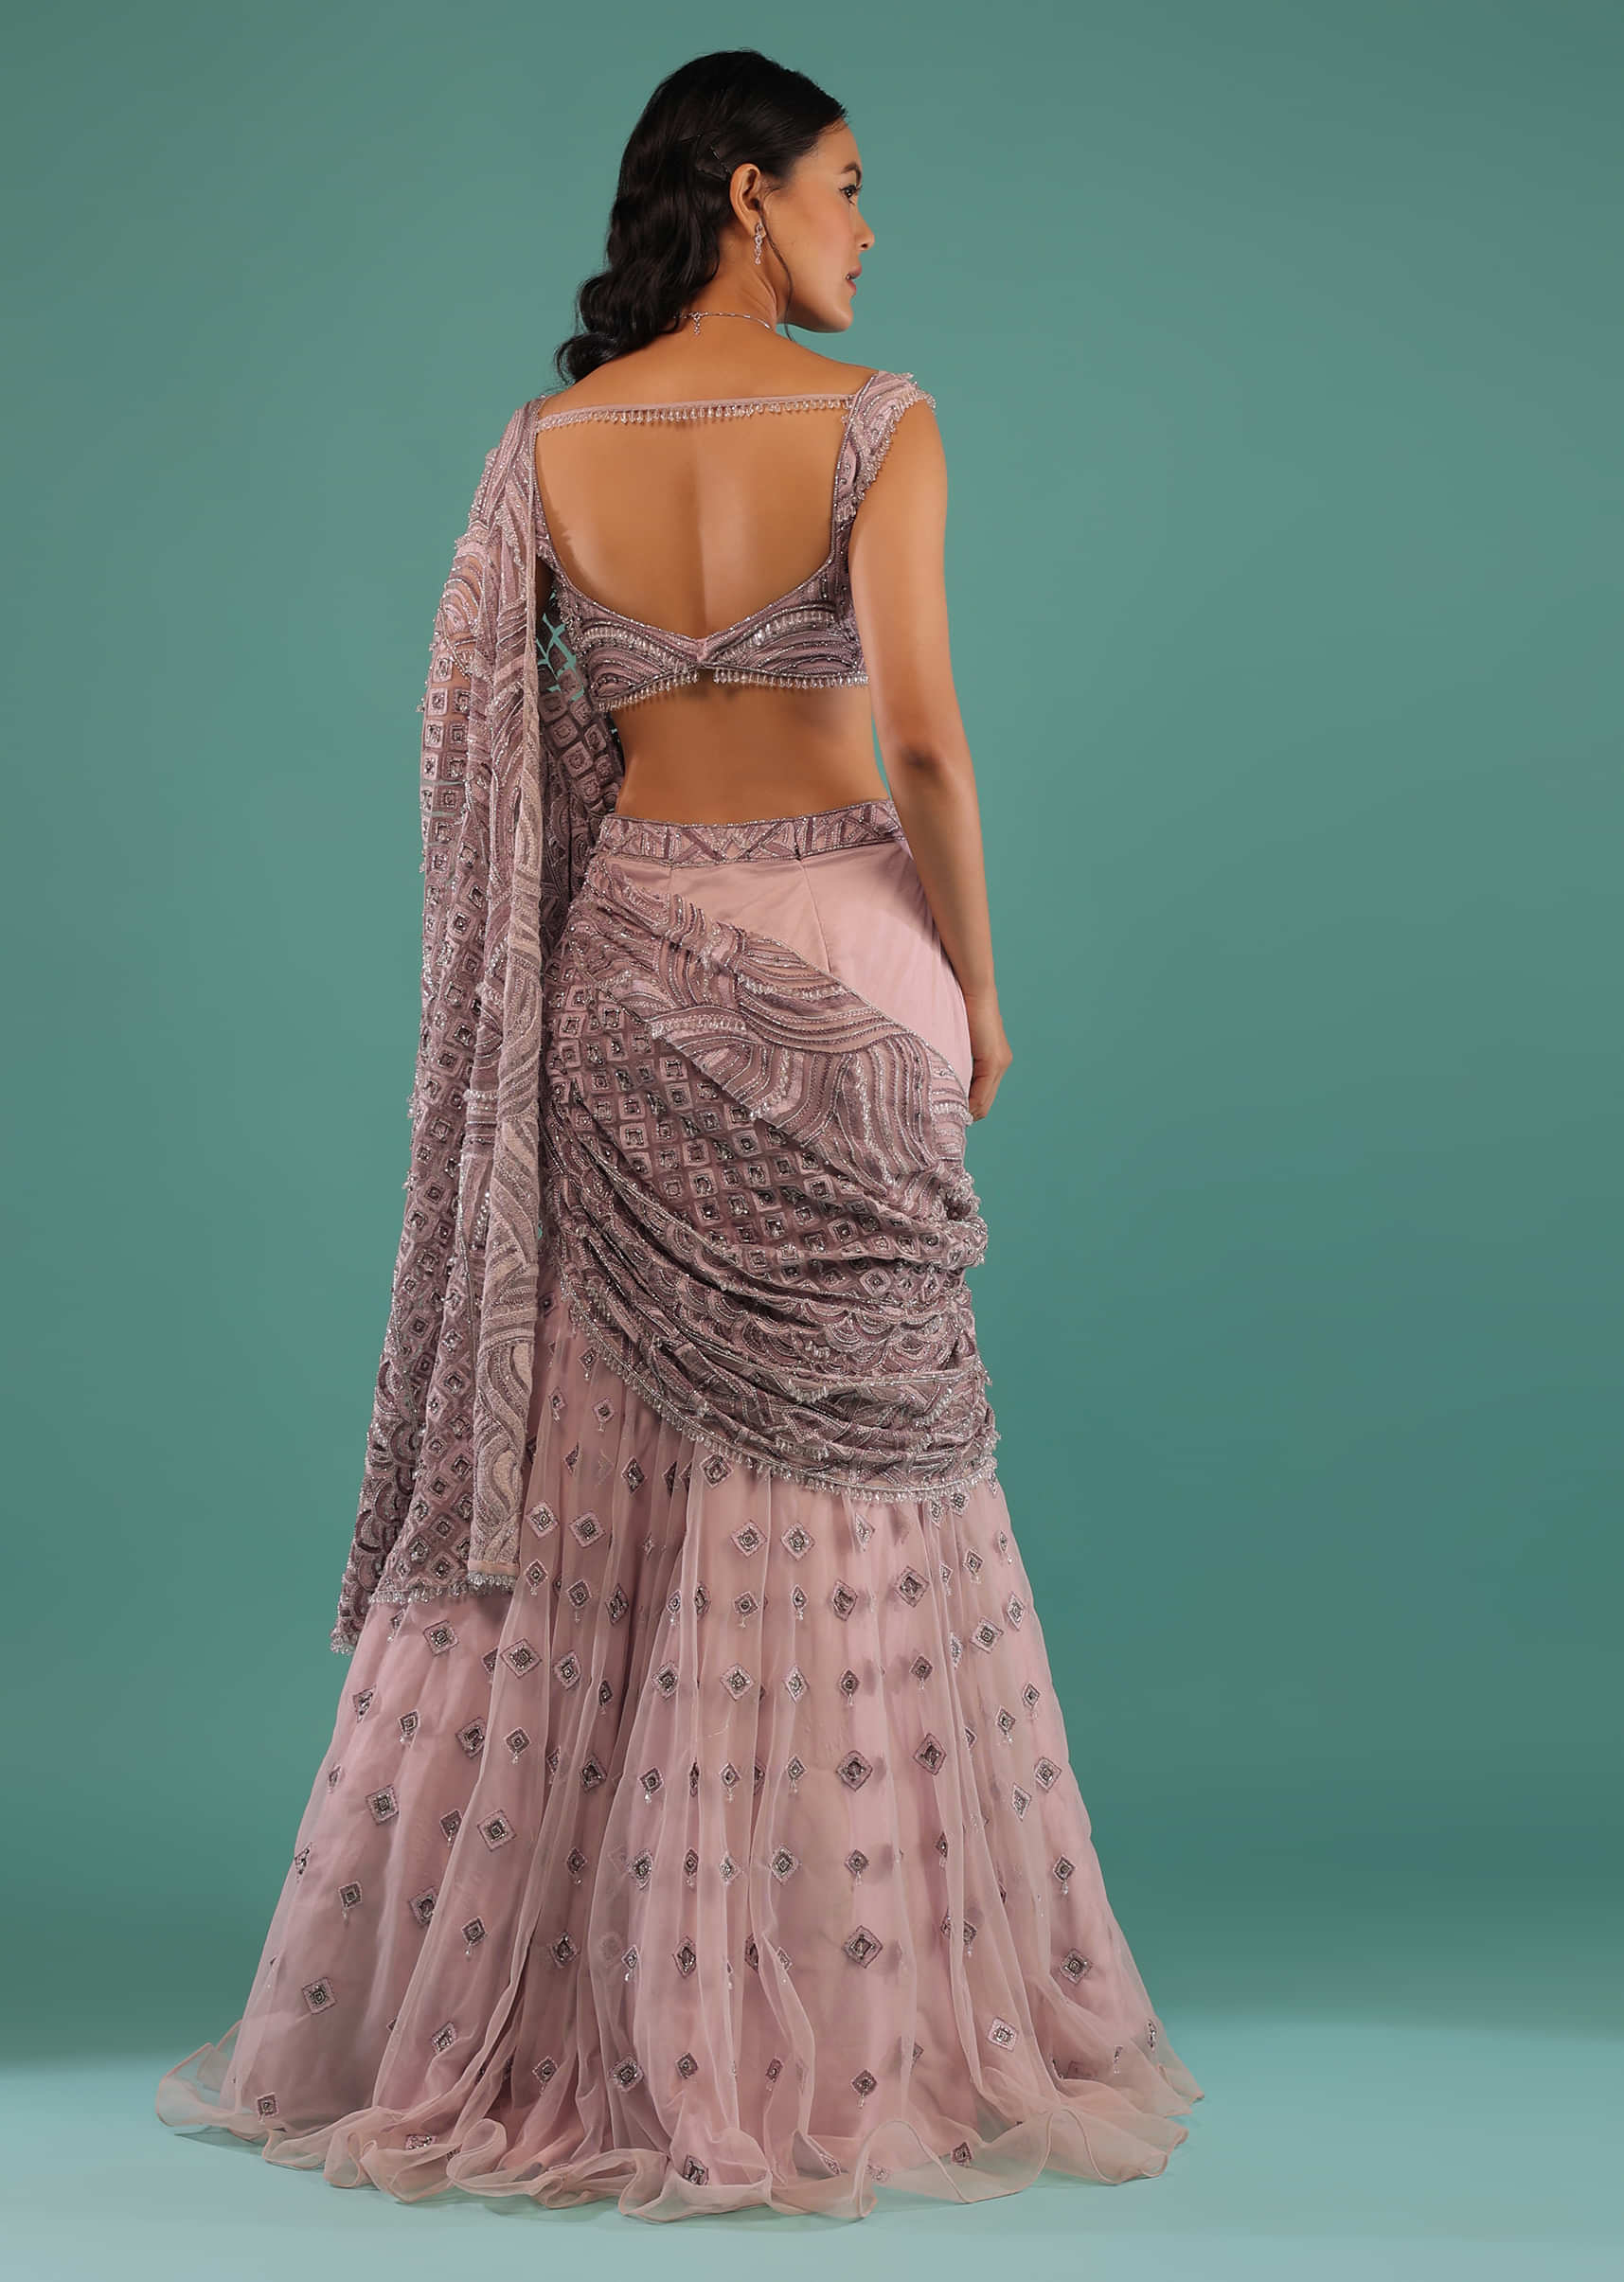 Ice Pink Mermaid Skirt And Crop Top With Attached Drape Featuring Resham And 3D Bead Embroidery